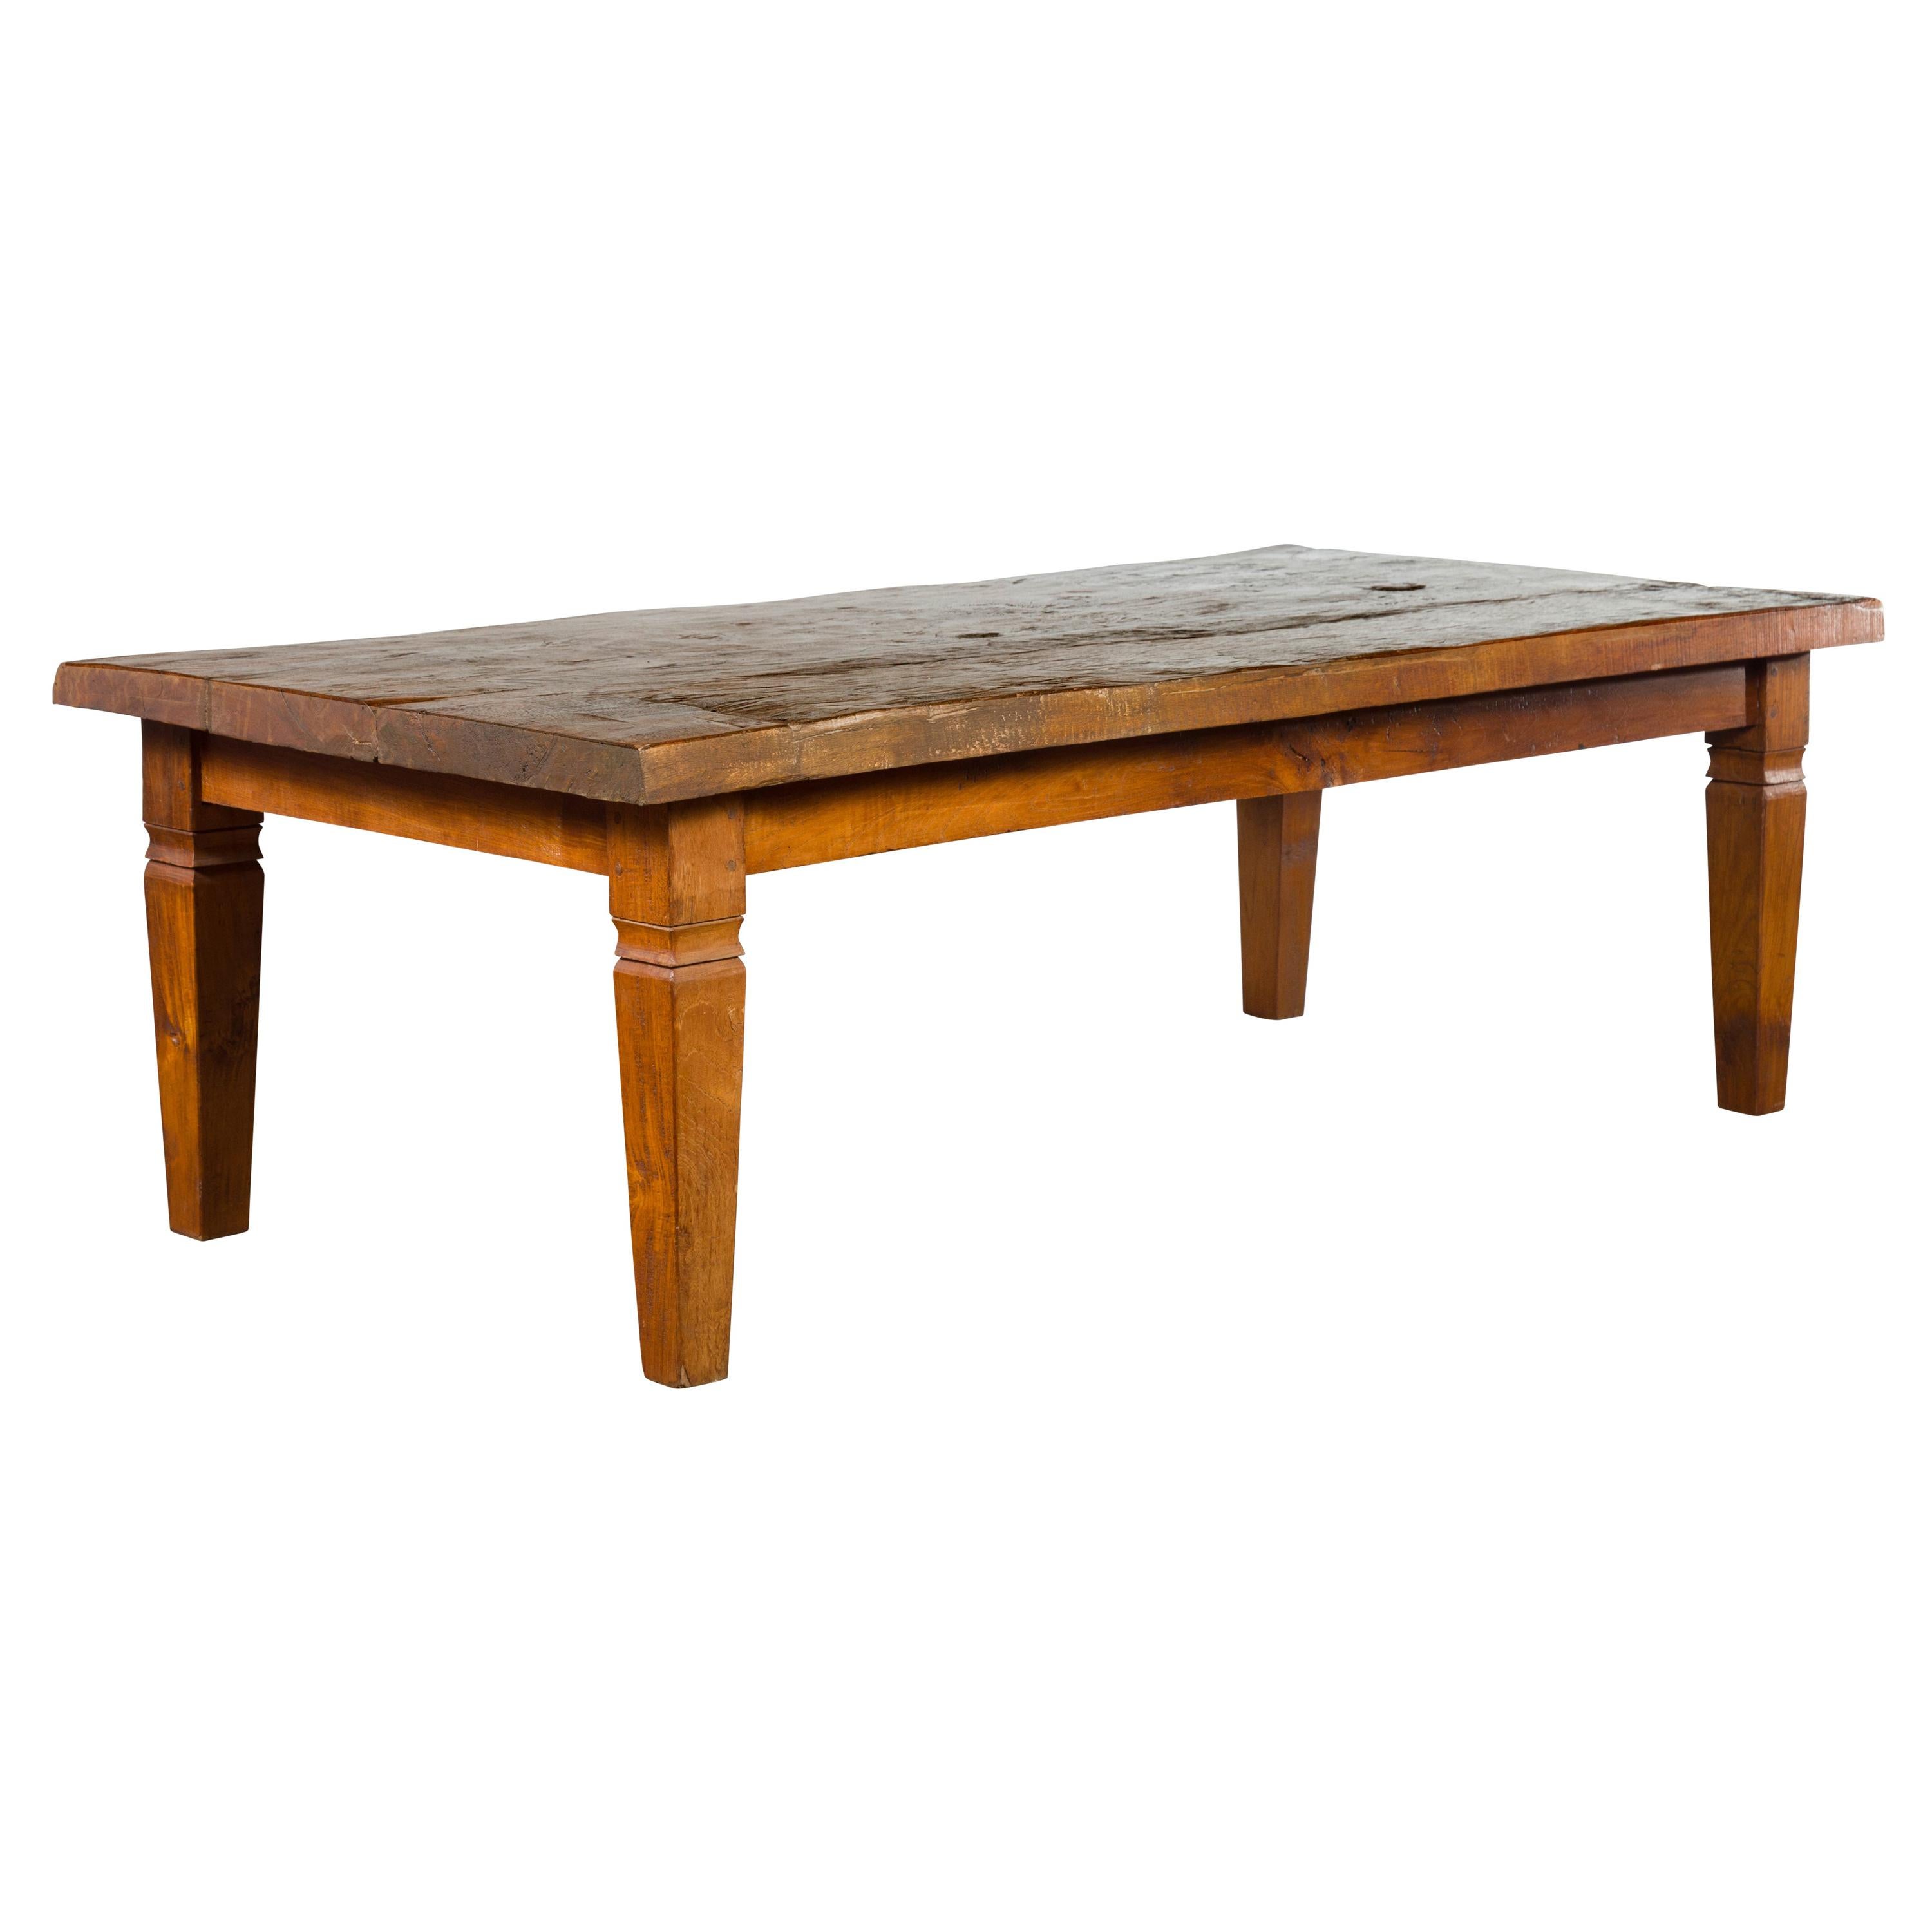 Rustic Indonesian 19th Century Coffee Table Made from a Slab of Wood